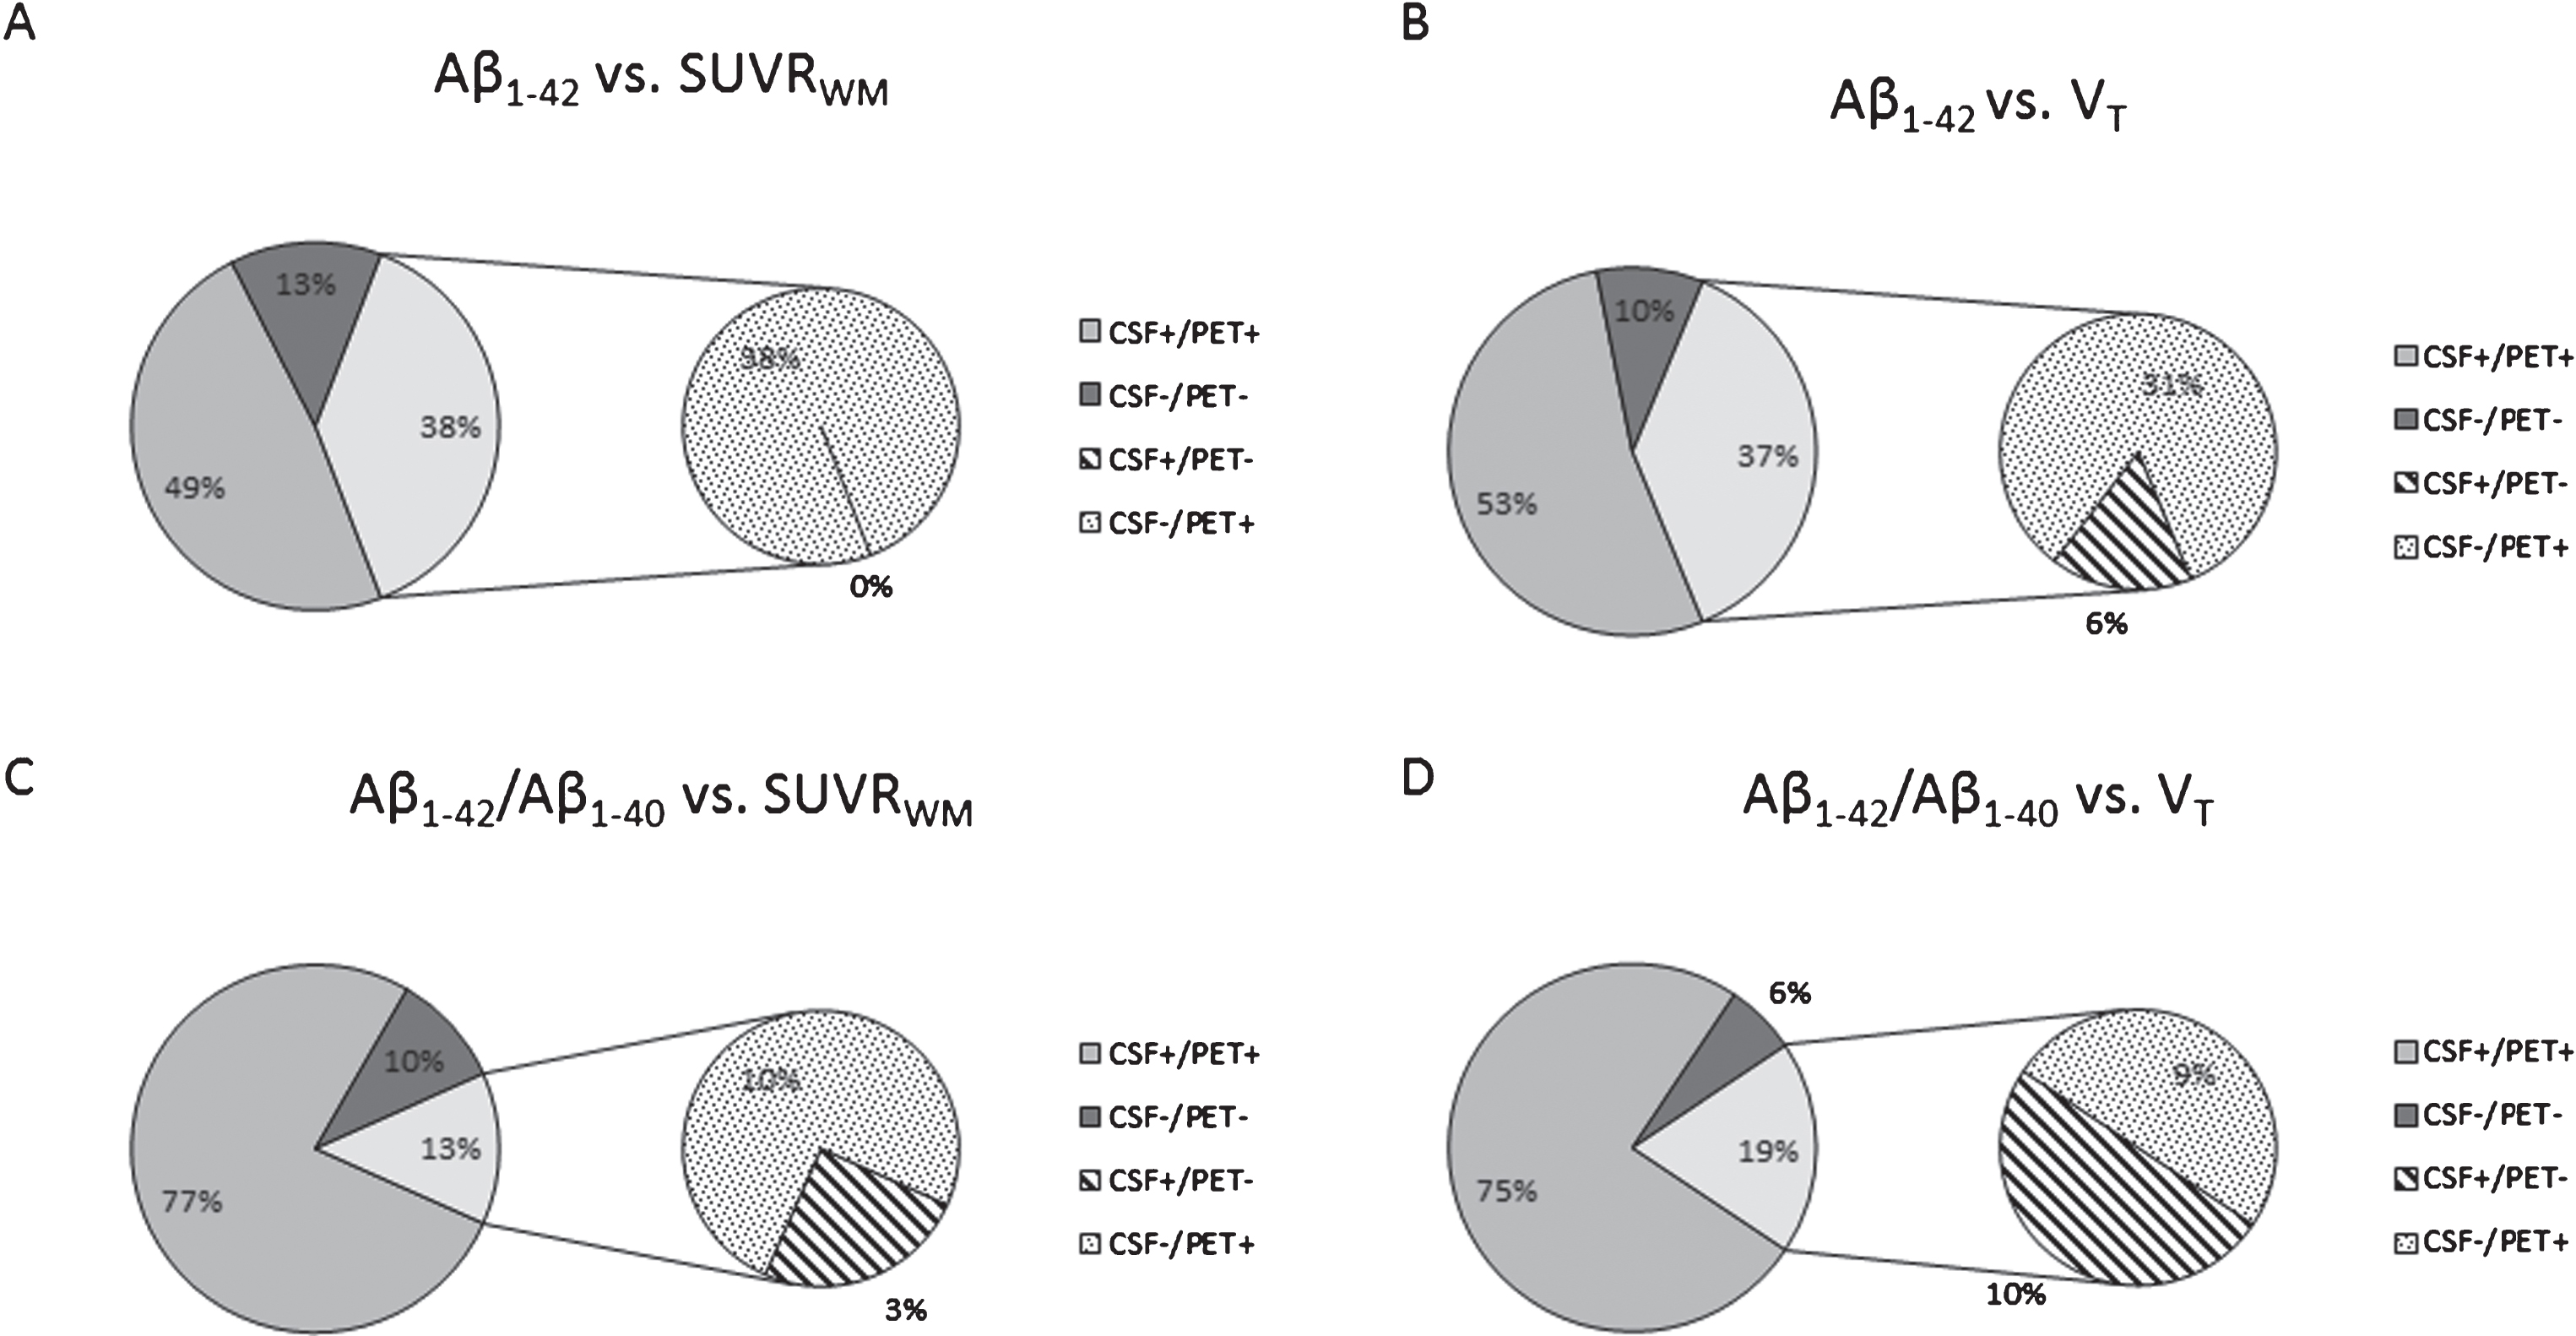 CSF Aβ versus SUVRWM (A and C) or VT (B and D) in MCI and AD dementia patients. After applying the CSF Aβ1–42/Aβ1–40 ratio a change from discordant negative CSF (CSF-/PET+) to concordant positive (CSF+/PET+) was detected. Only VT and SUVRWM are shown in this figure as VT is still the gold standard and SUVRWM is stronger correlated to CSF concentrations compared to SURVCB, in which no significant difference was detected between both SUVR measures. In total, 13% patients had only one abnormal amyloid marker when CSF was compared to SUVRWM, of which 10% had a positive amyloid-PET scan (CSF-/PET+), whereas only 3% of the patients had an abnormal CSF Aβ1–42/Aβ1–40 value (CSF+/PET-). For CSF compared to VT 19% had discordant amyloid markers, of which 9% had a positive amyloid-PET scan (CSF-/PET+), whereas 10% of the patients had an abnormal CSF Aβ1–42/Aβ1–40 value (CSF+/PET-). The other patients were in full concordance for their amyloid markers. This change from discordant negative CSF (CSF-/PET+) to concordant positive (CSF+/PET+) when the CSF Aβ1–42/Aβ1–40 was applied was also detected for the other [18F]AV45 PET measures (visual and SUVRCB). AD, Alzheimer’s disease; [18F]AV45, [18F]Florbetapir; CB, cerebellar grey matter; CSF, cerebrospinal fluid; MCI, mild cognitive impairment; SUVR, standardized uptake value ratio; VT, total volume of distribution; WM, whole subcortical white matter.